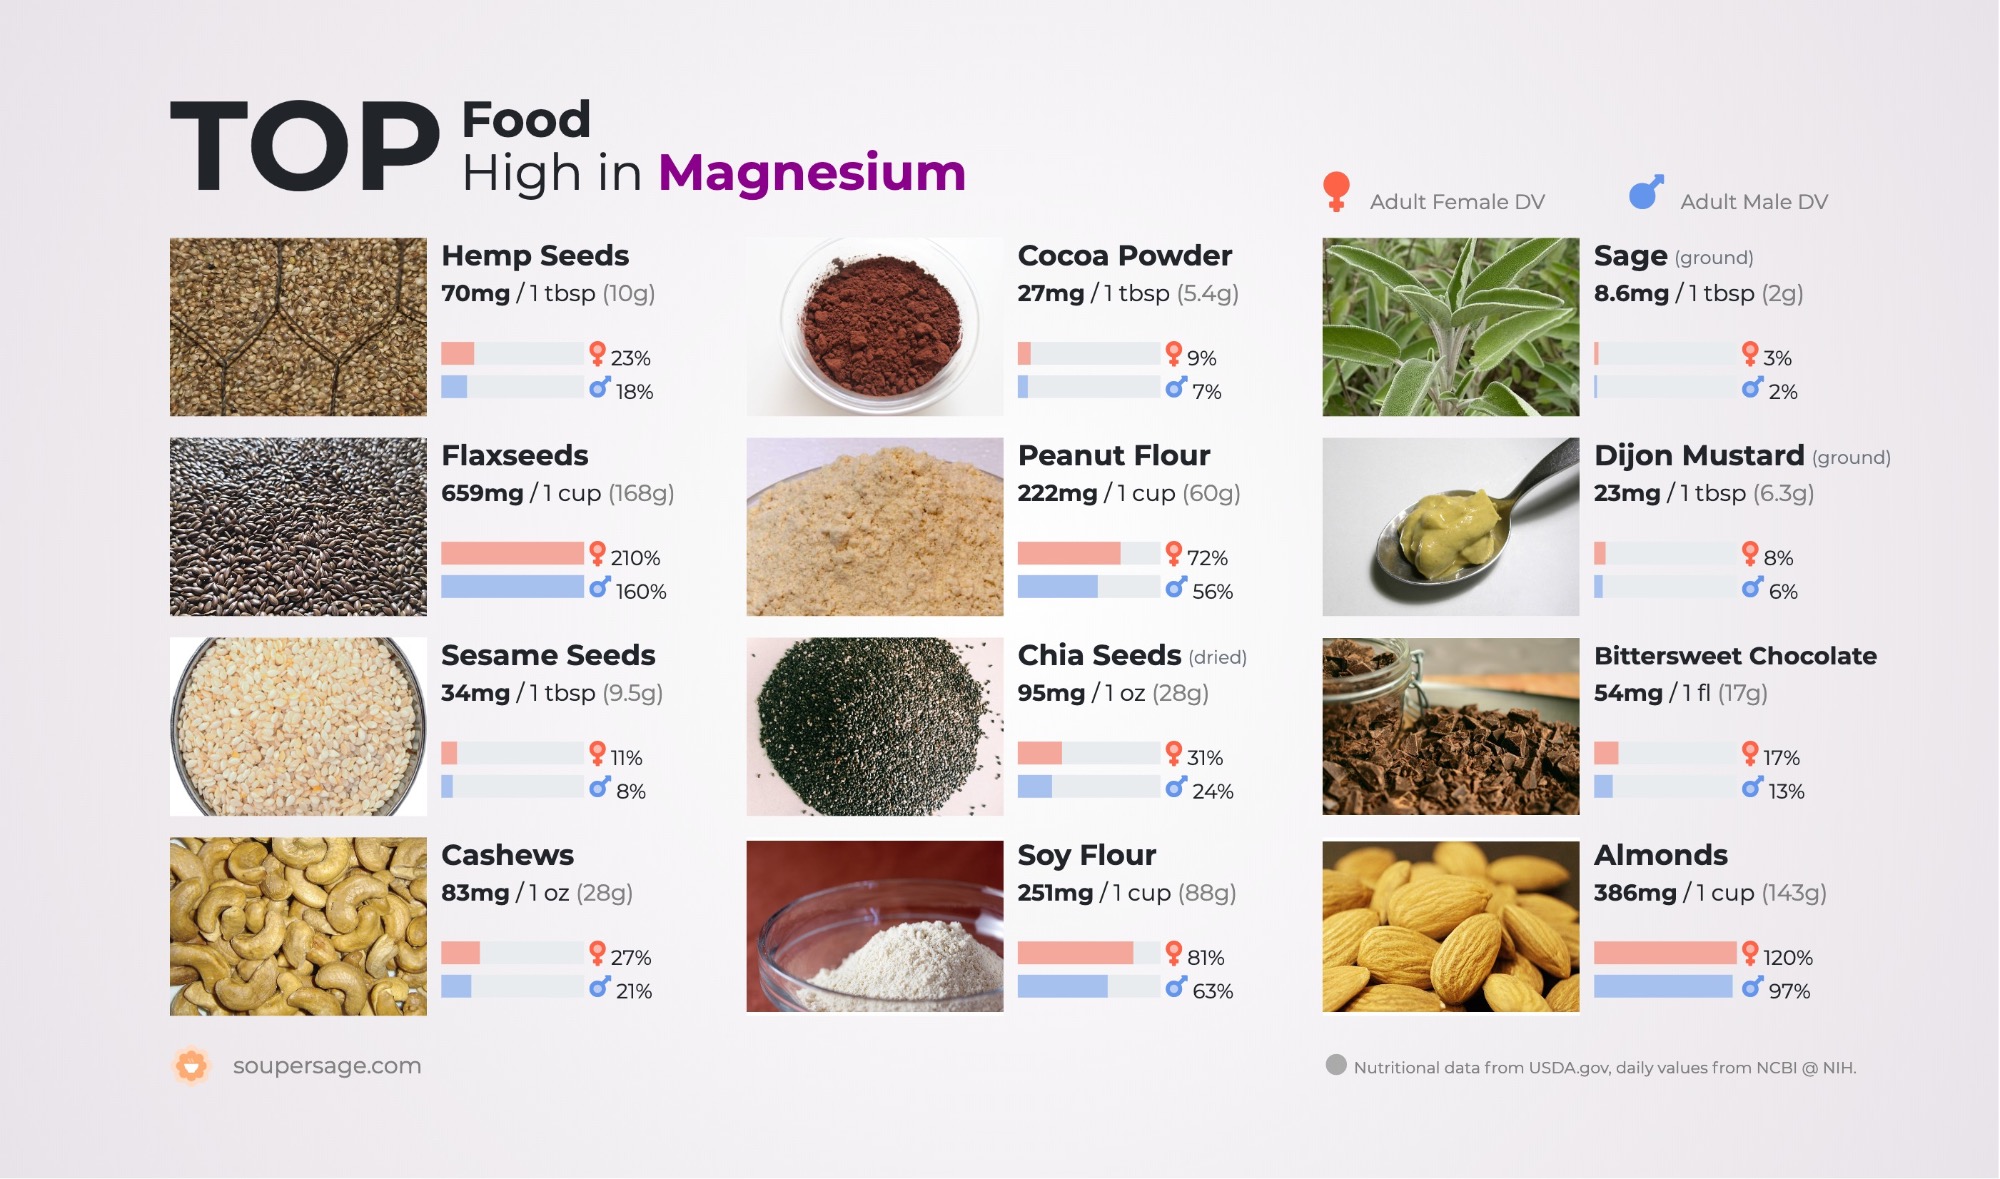 image of Top Food High in Magnesium